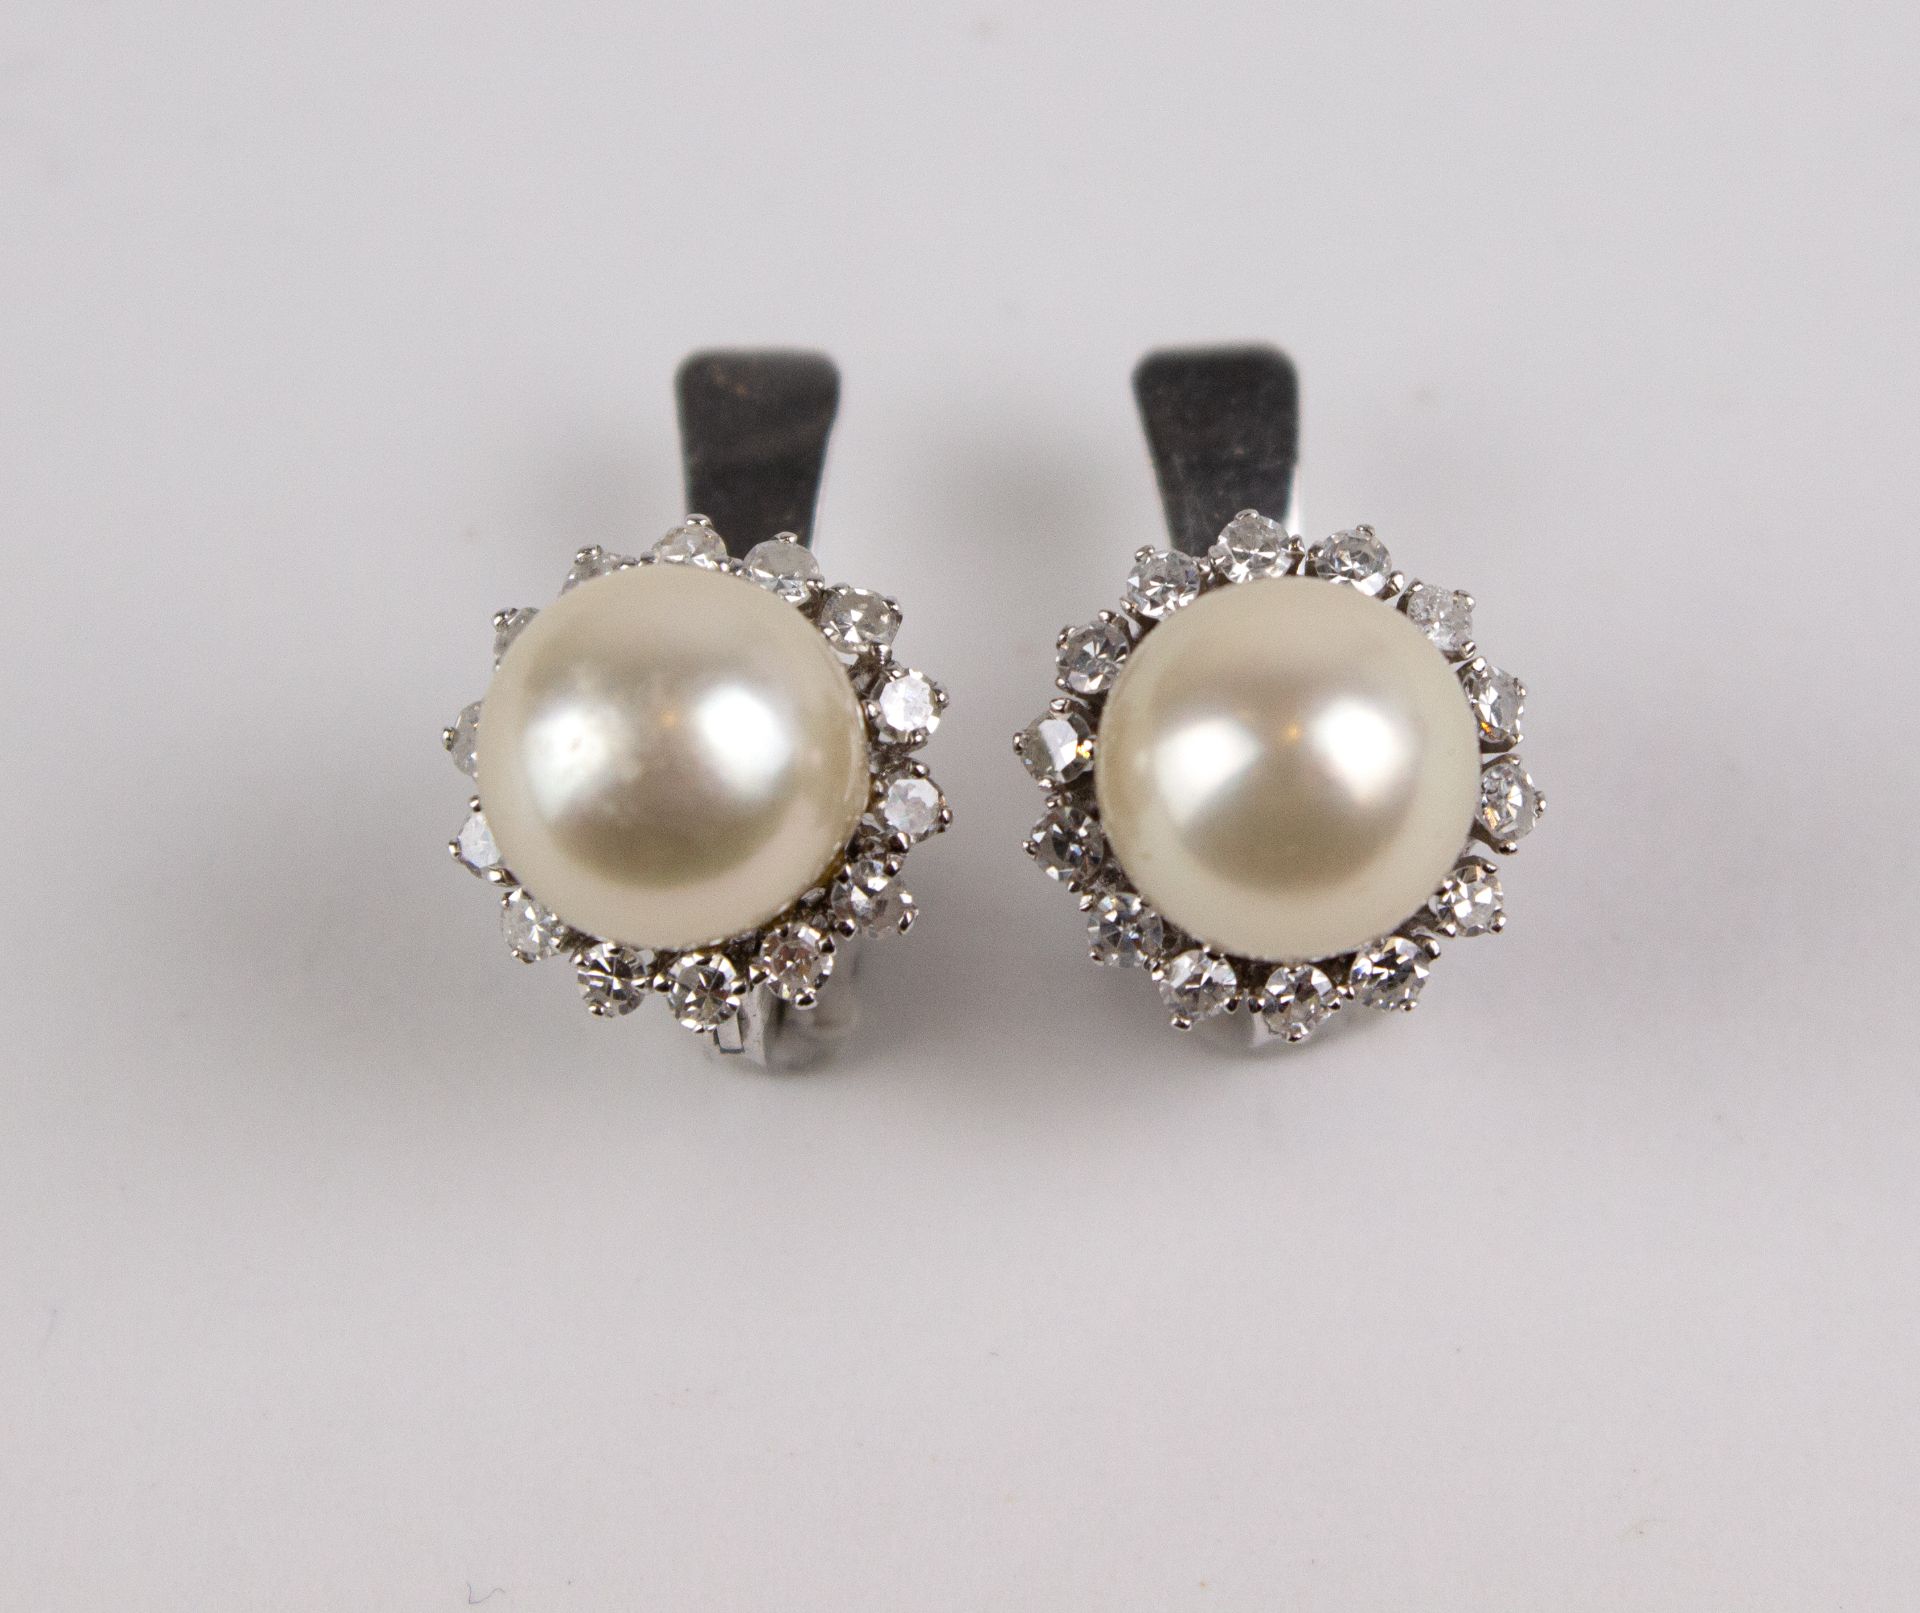 Carreras. A pair of diamond and cultured pearls cluster earrings - Image 3 of 4